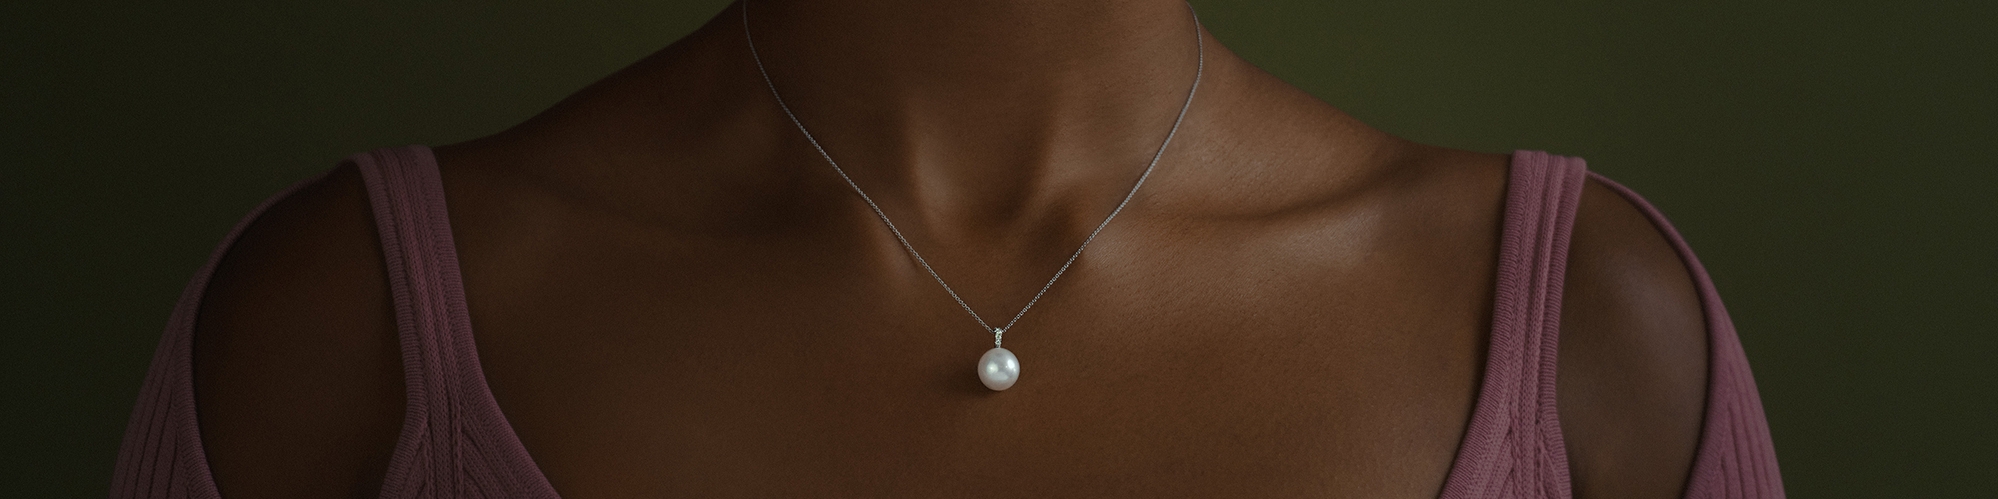 Win a diamond and pearl necklace worth £1,100